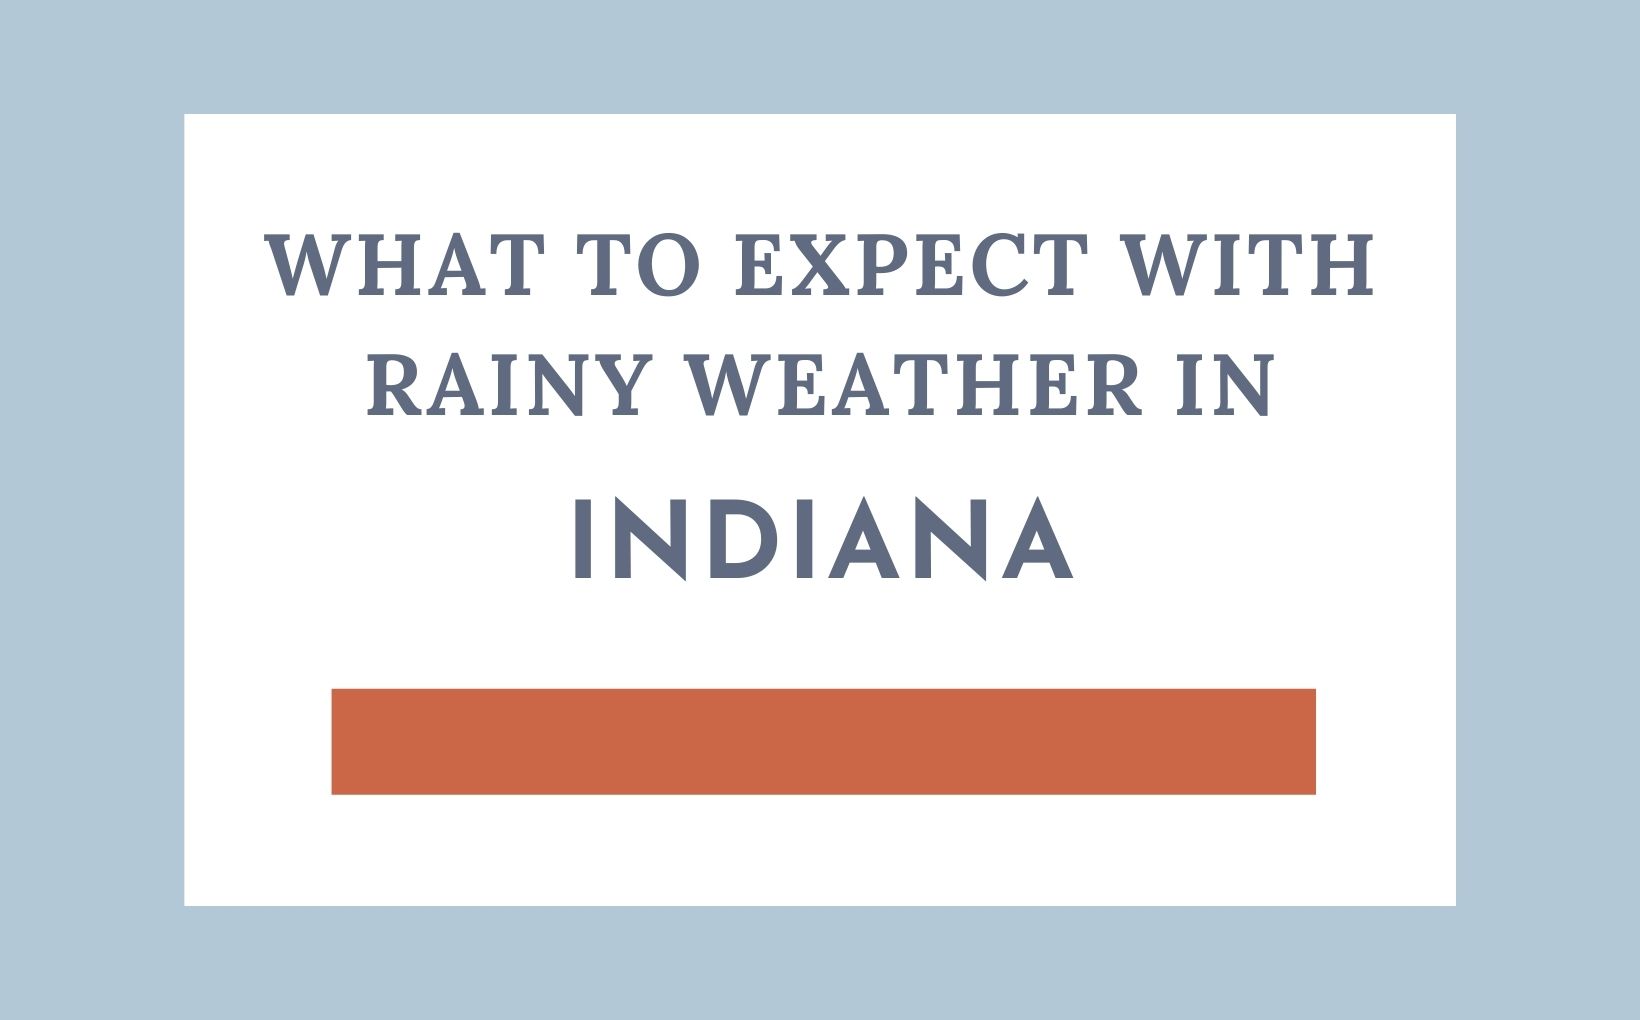 What to expect with rainy weather in Indiana feature image